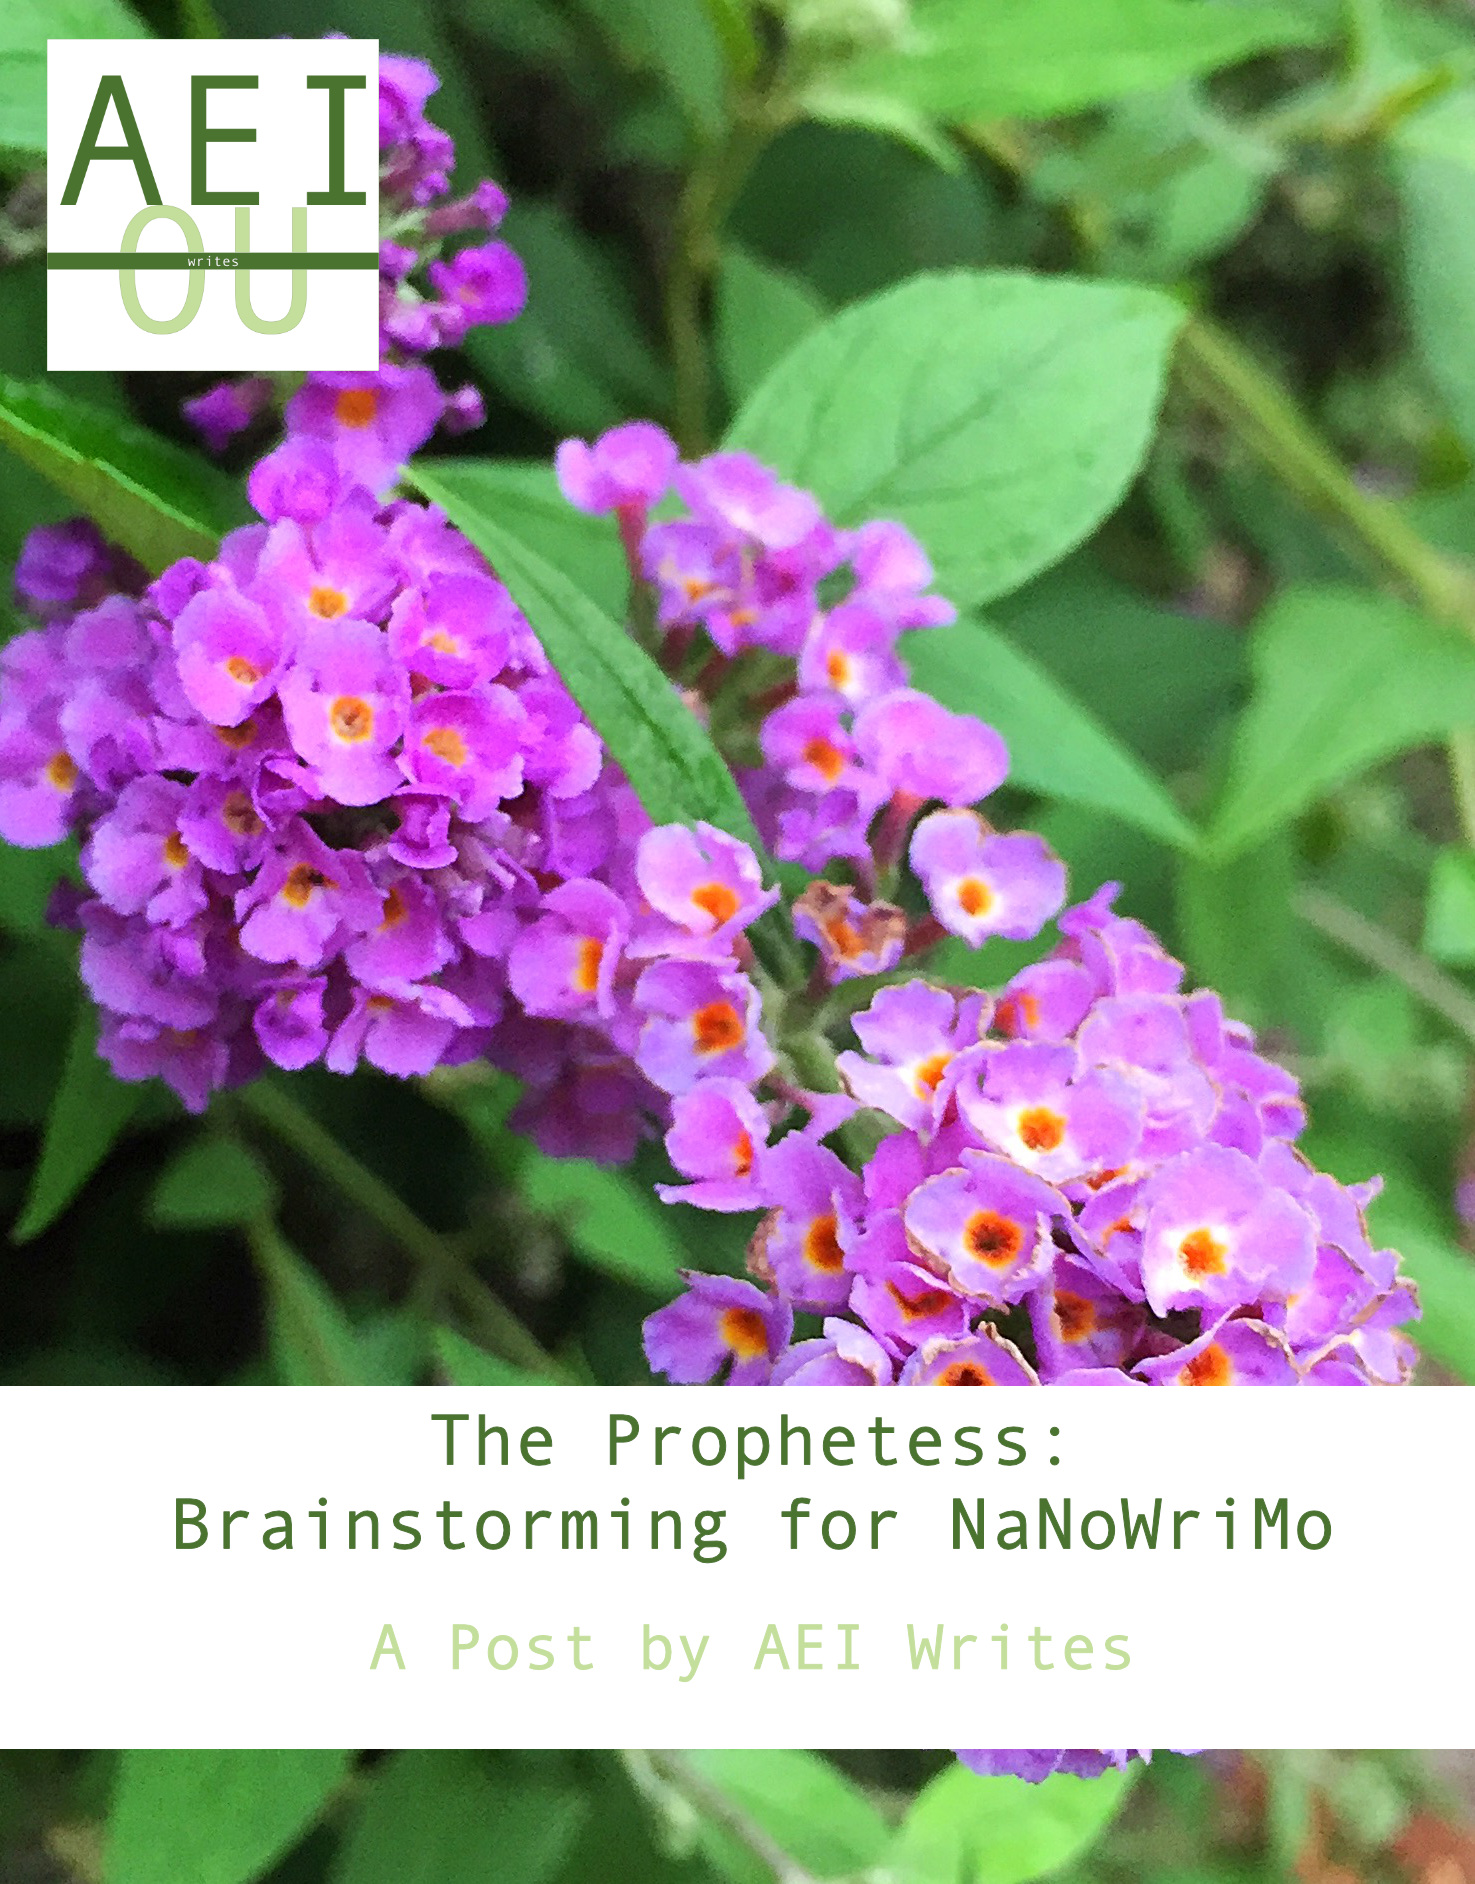 The Prophetess: Brainstorming for NaNoWriMo